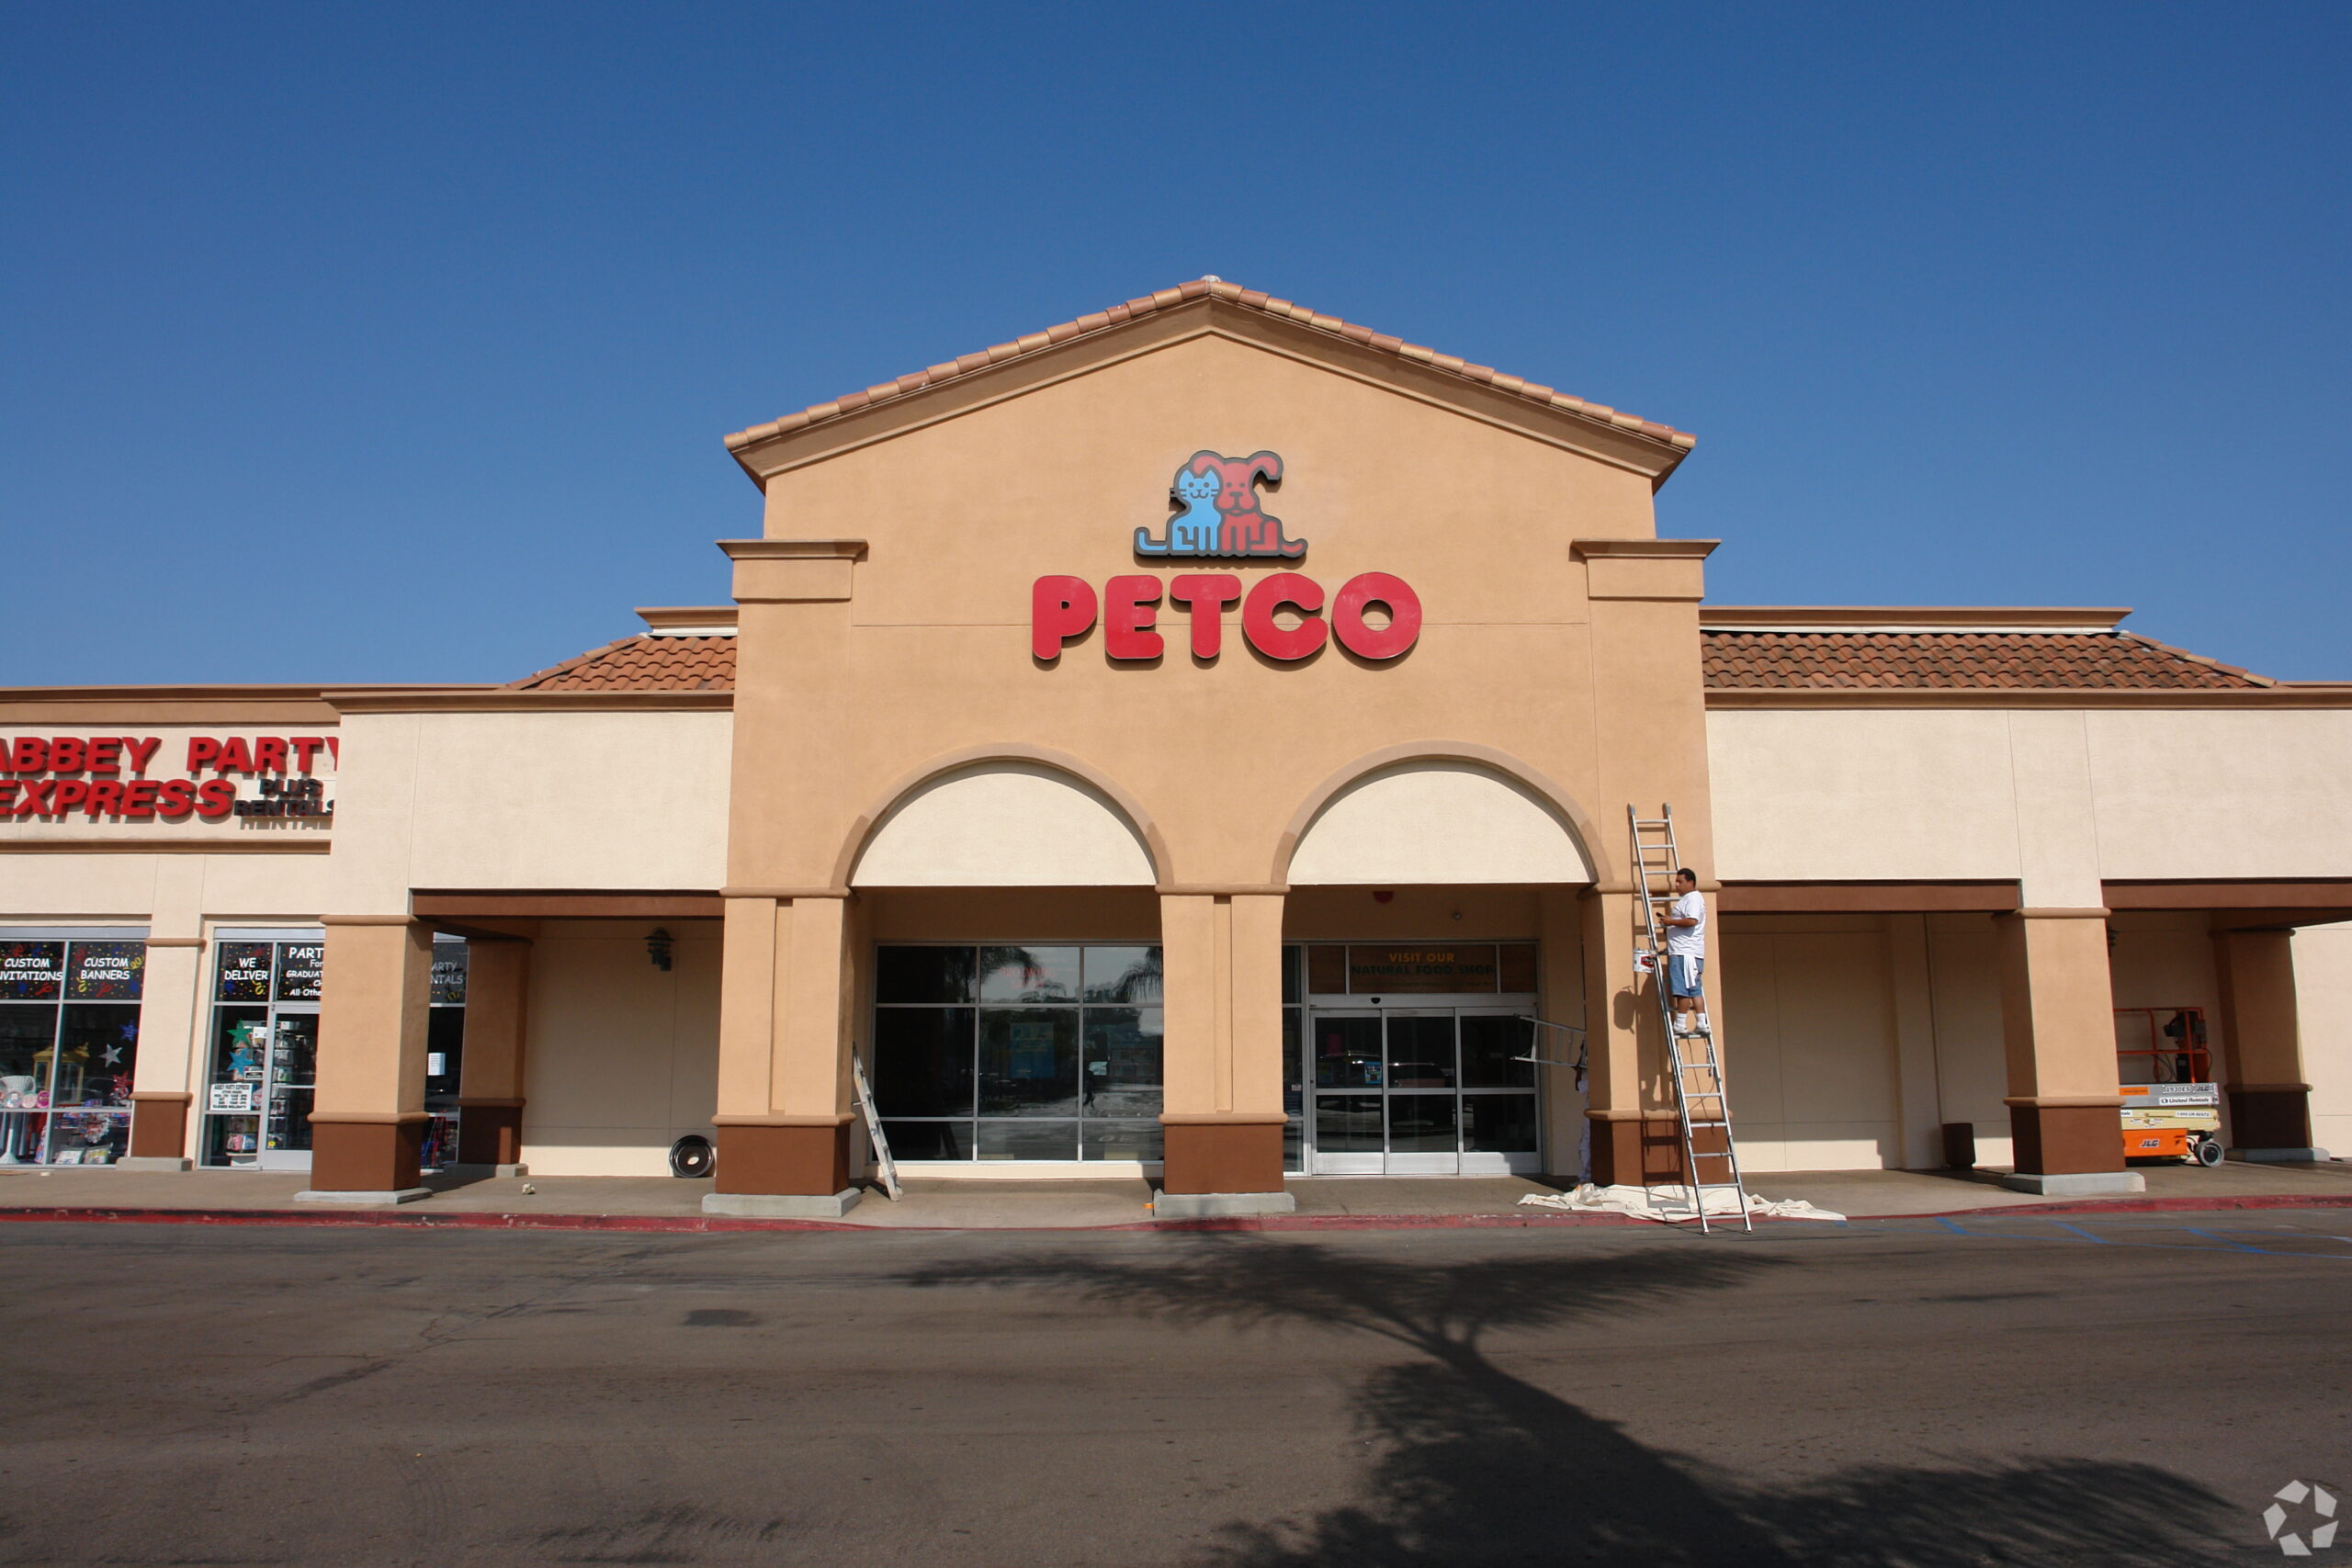 Petco To Buy Full Veterinary Practices to Boost In-Store Hospital Business in Industry Property Shift